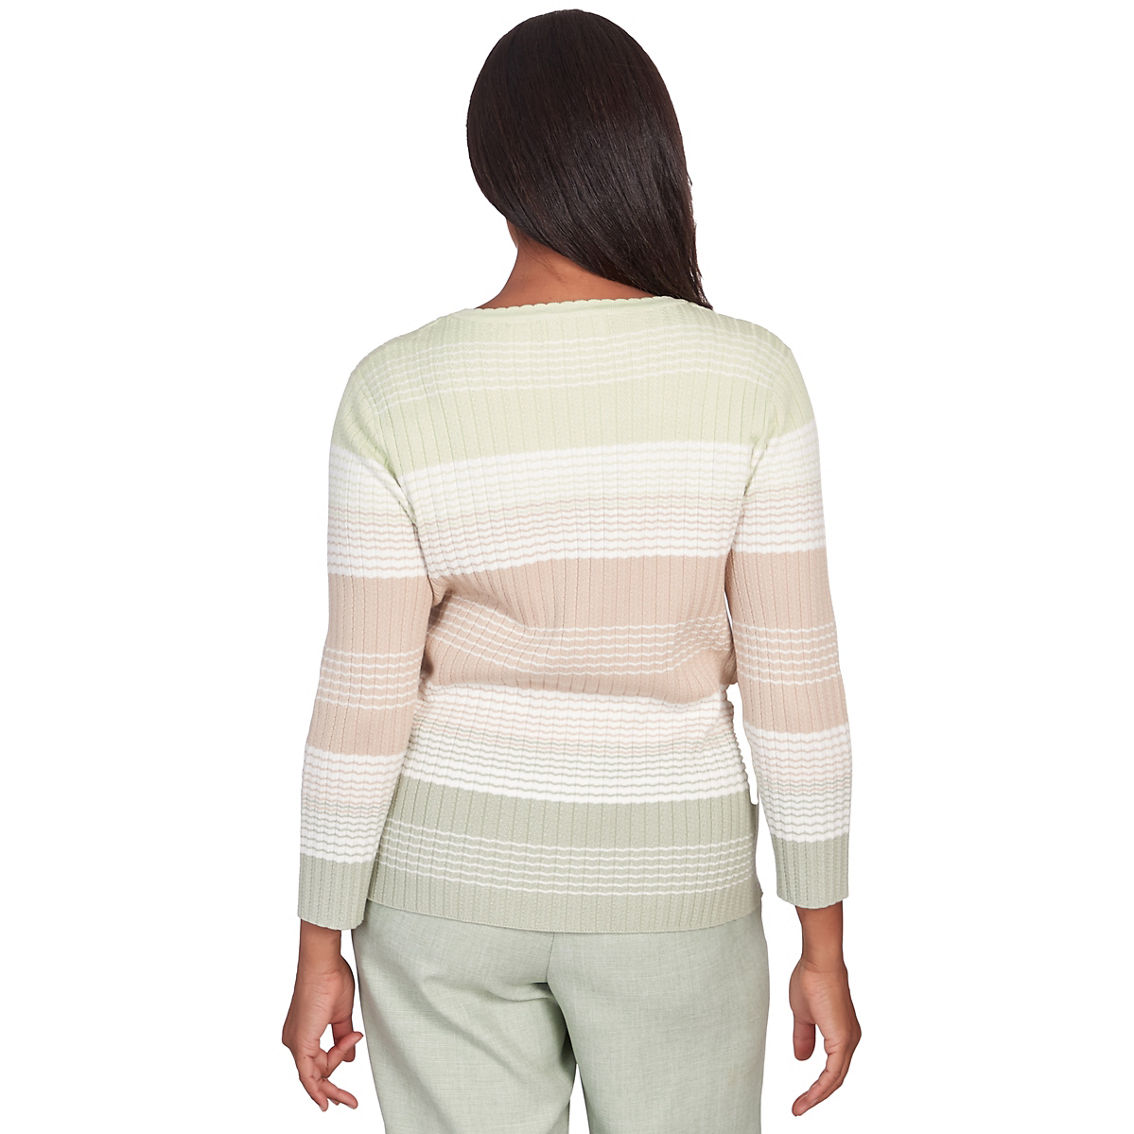 Alfred Dunner Women's English Garden Texture Stripe Crew Neck Sweater With Necklace - Image 2 of 4